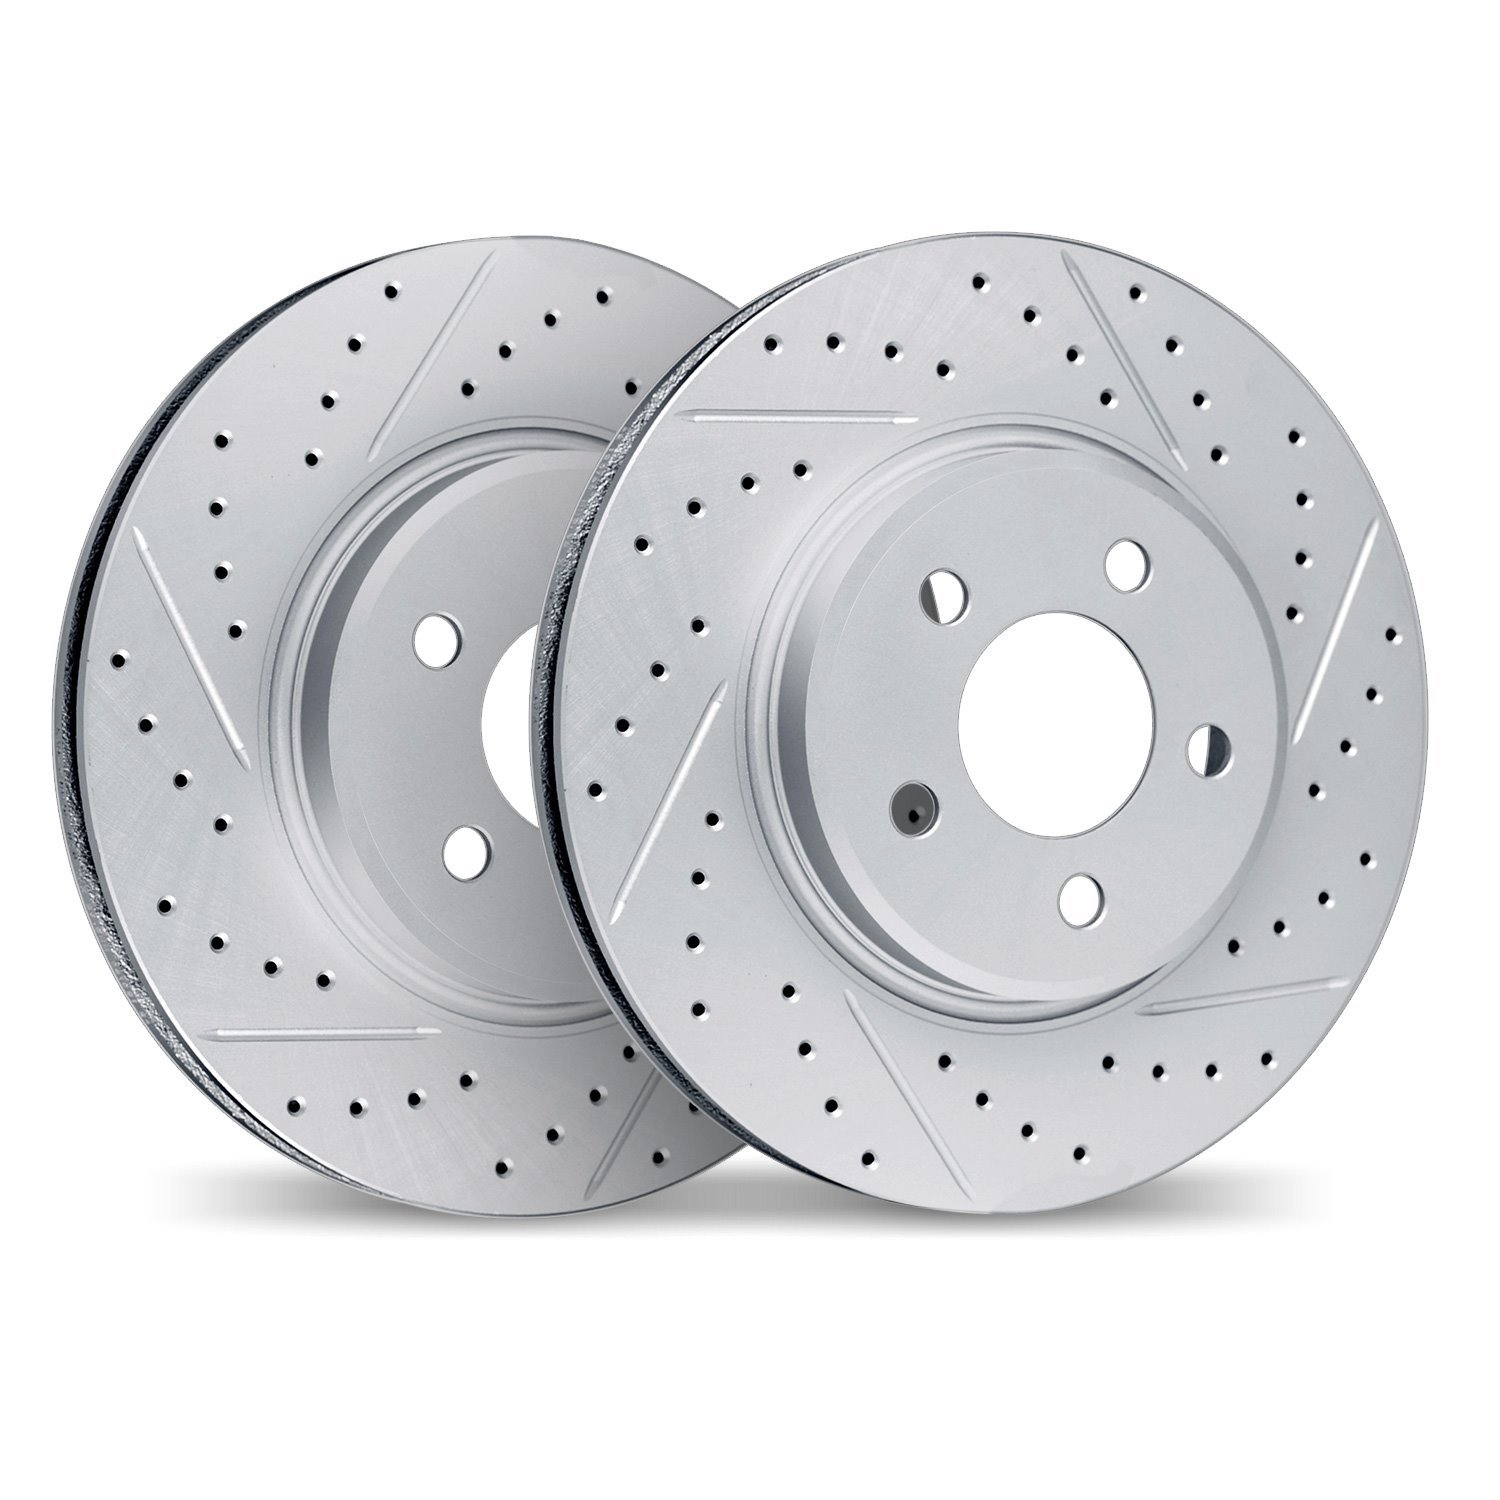 2002-54058 Geoperformance Drilled/Slotted Brake Rotors, 1997-2004 Ford/Lincoln/Mercury/Mazda, Position: Front